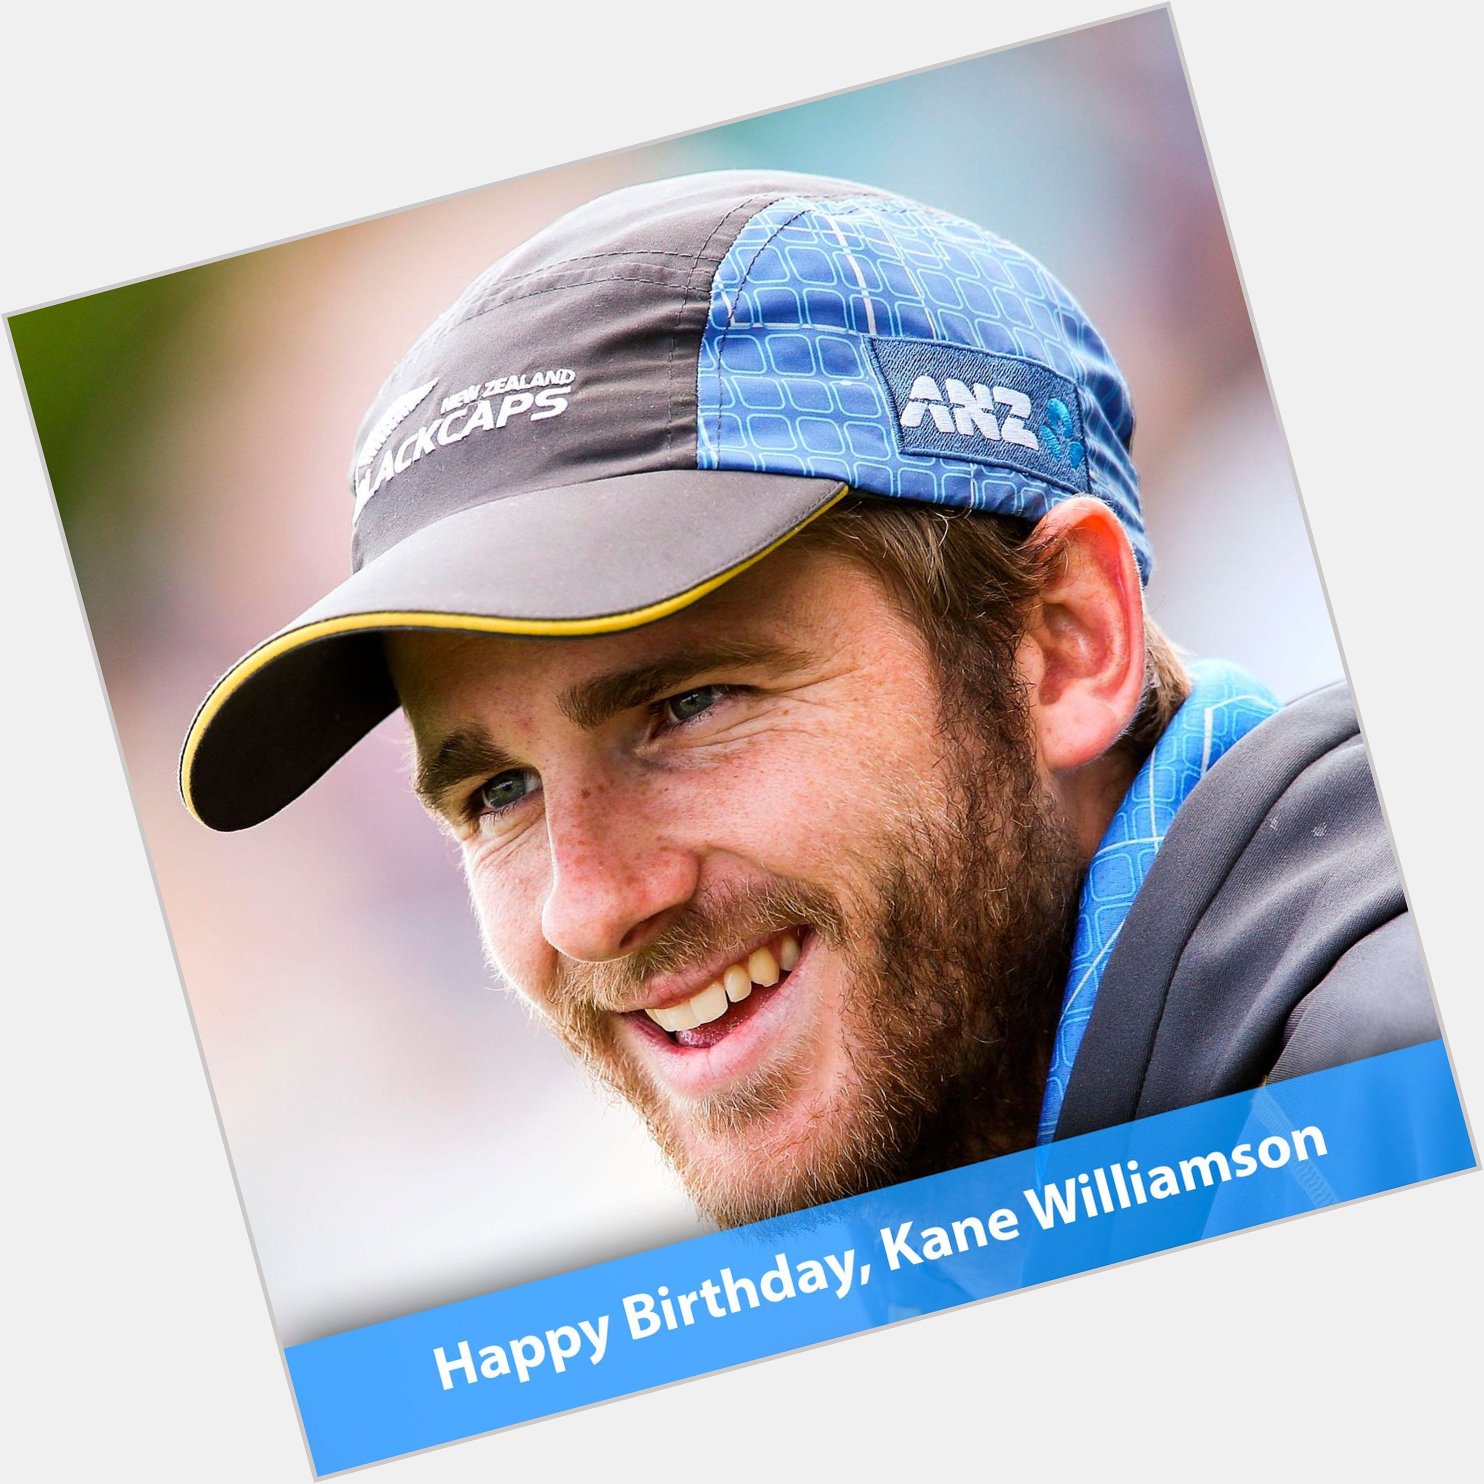 Happy Birthday to kane Williamson, the wall of New Zealand cricket, turns 27 today 